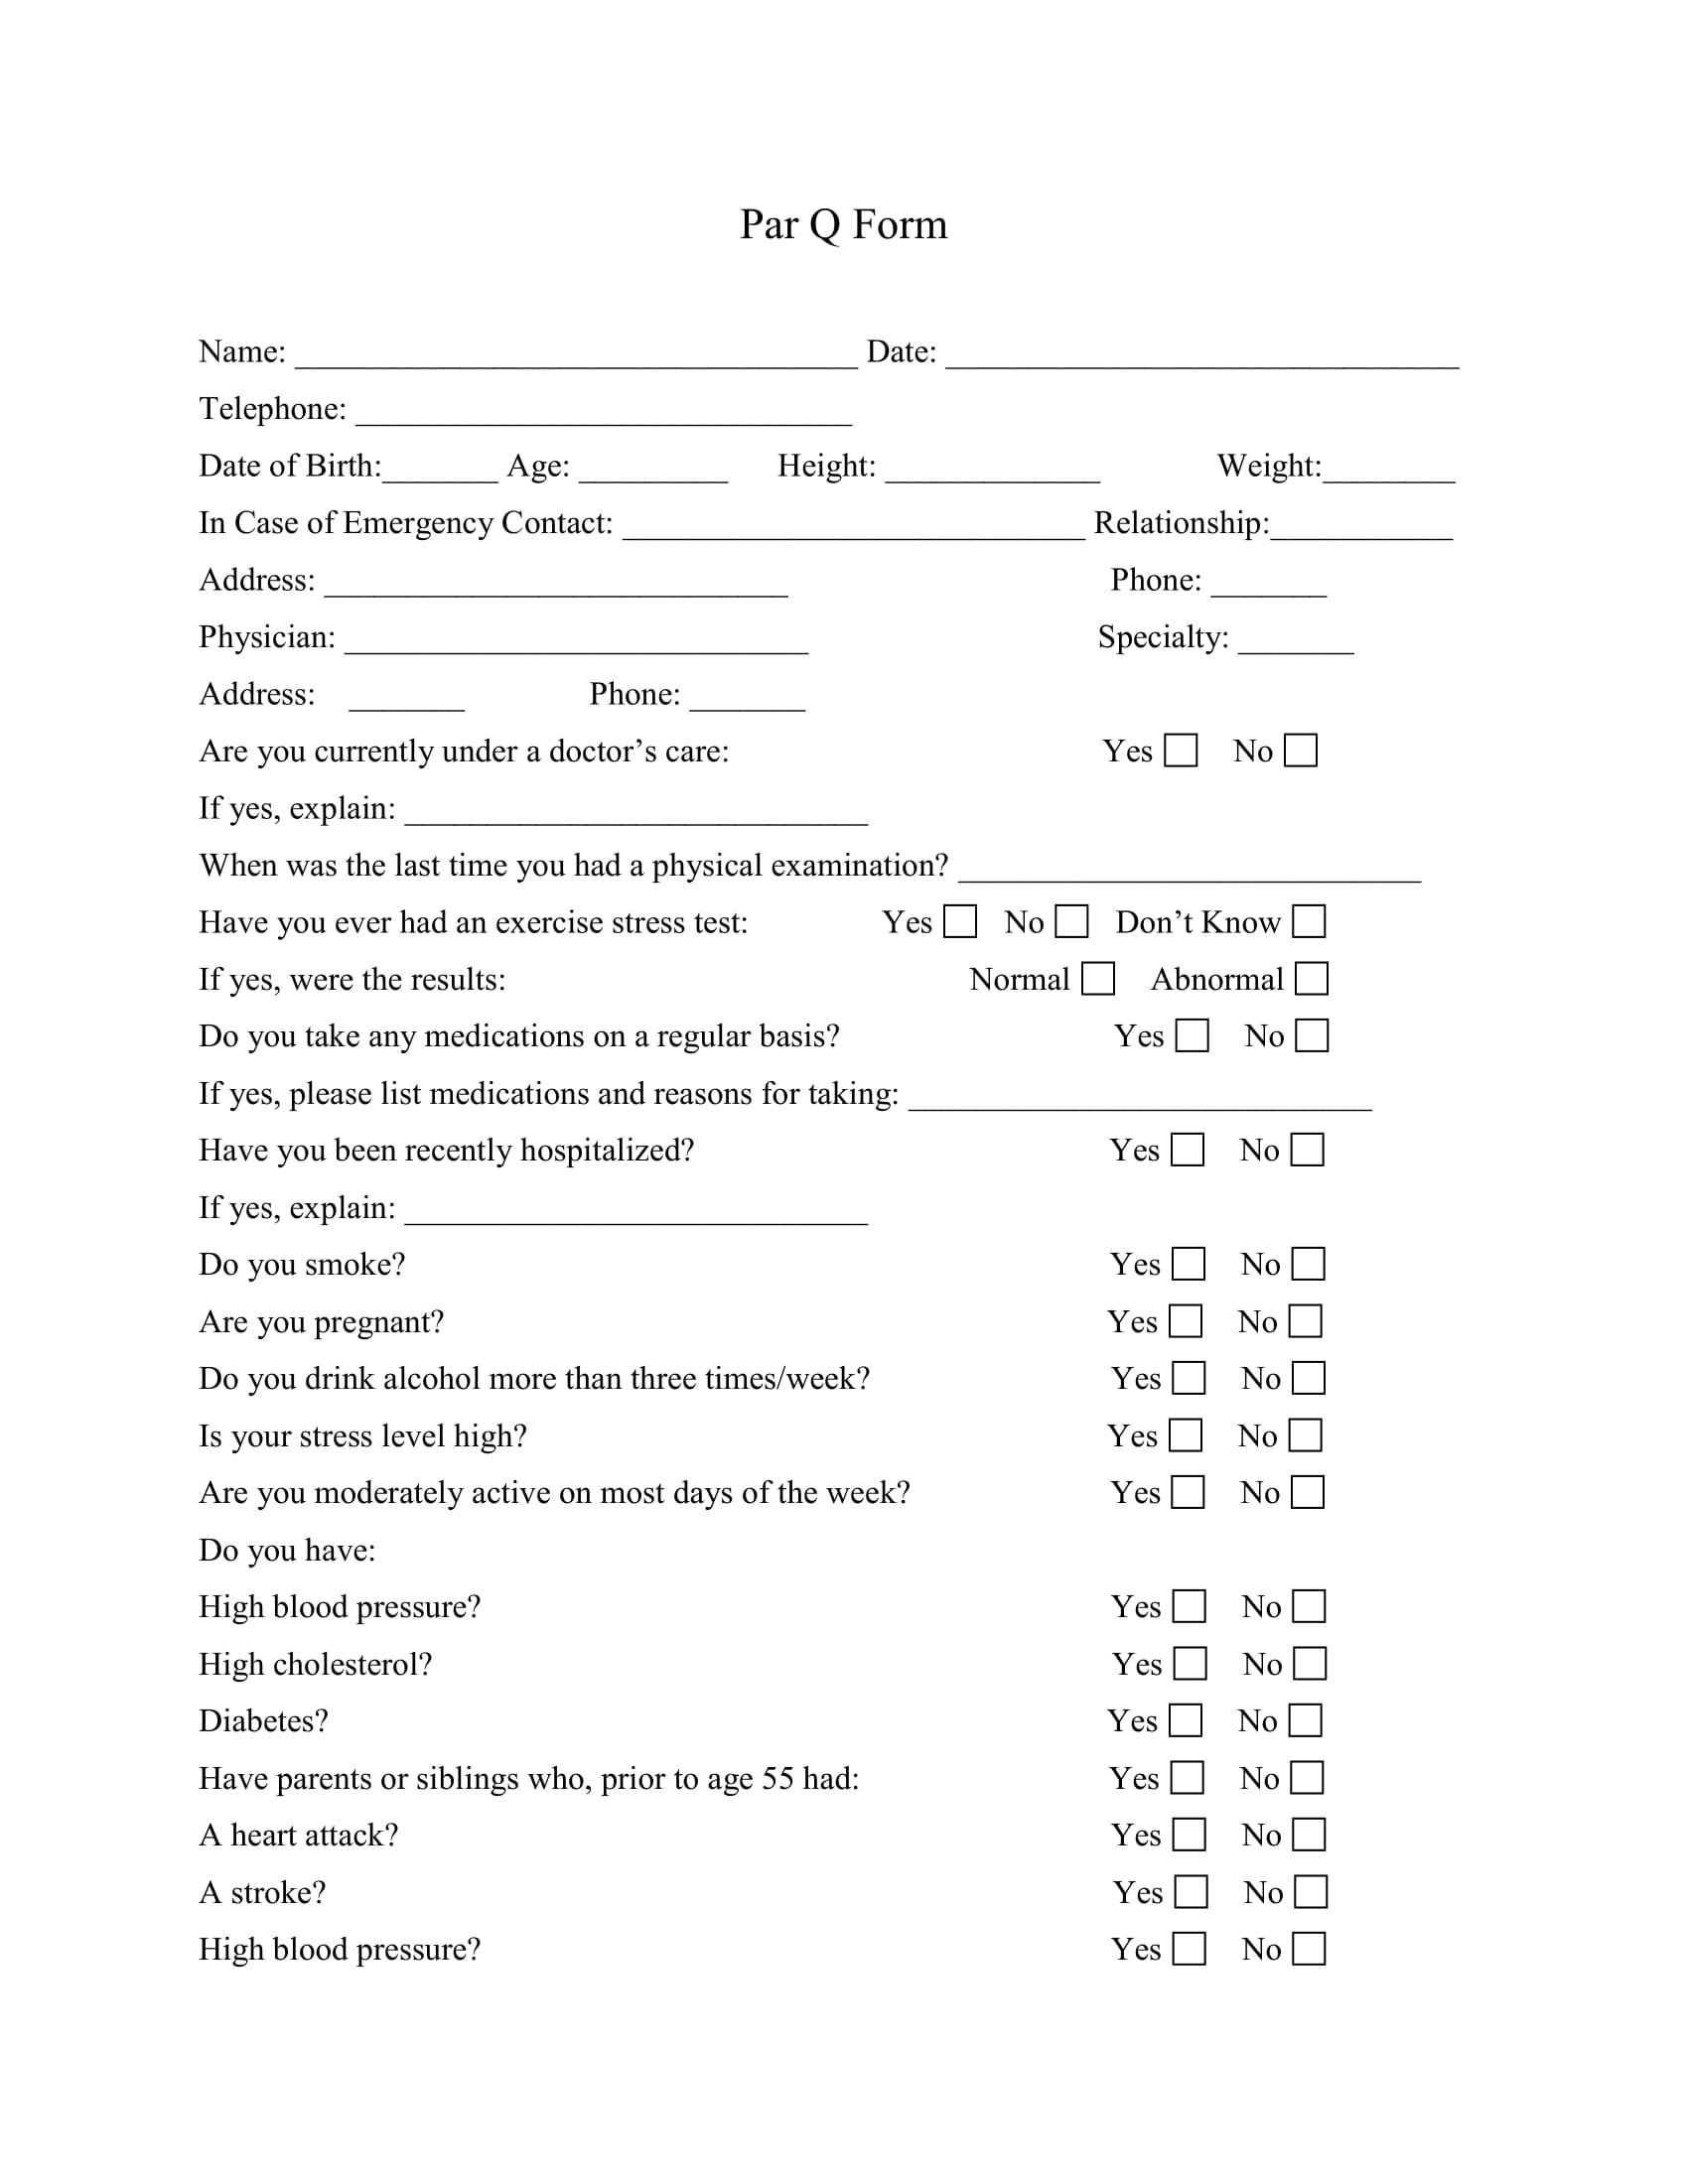 Par q form template you can download in Word format.